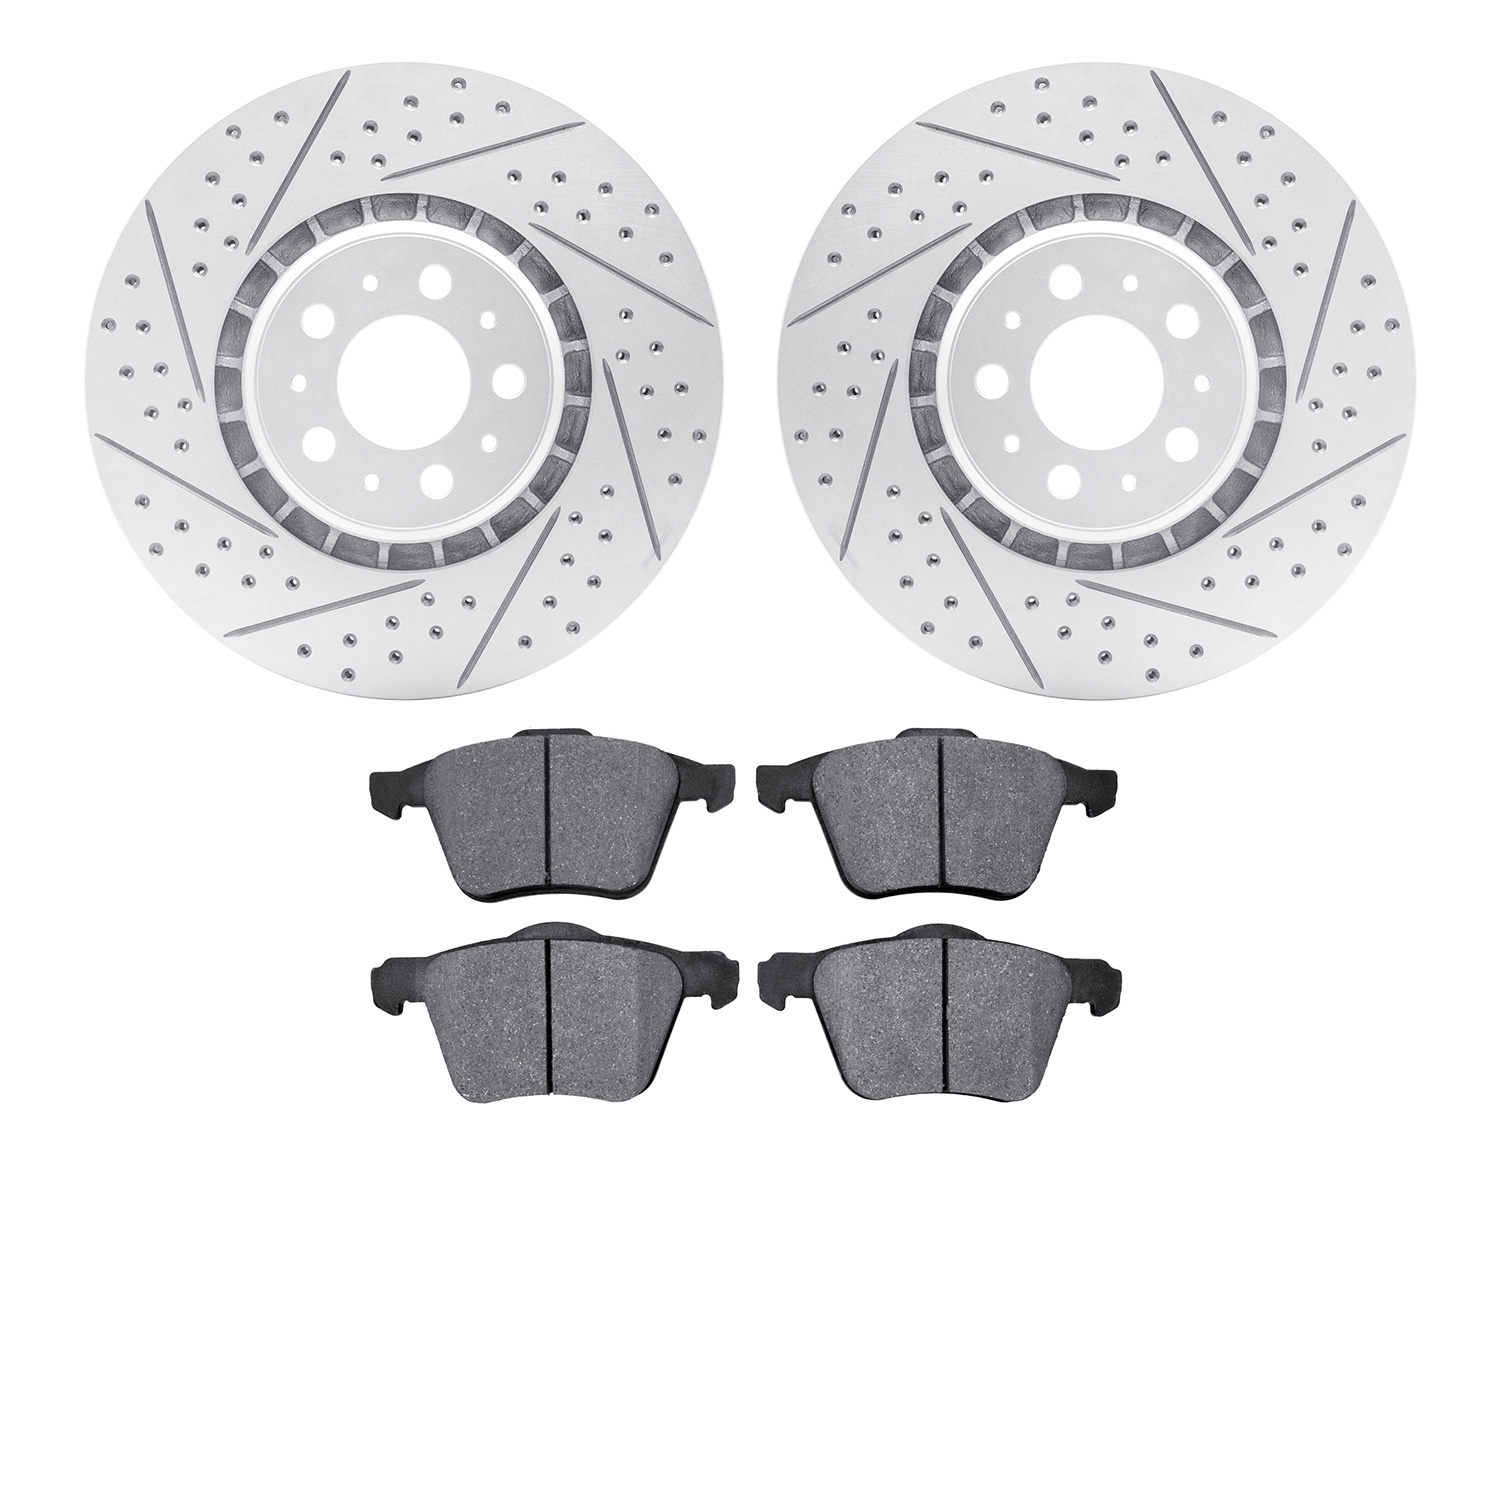 2502-27032 Geoperformance Drilled/Slotted Rotors w/5000 Advanced Brake Pads Kit, 2003-2009 Volvo, Position: Front